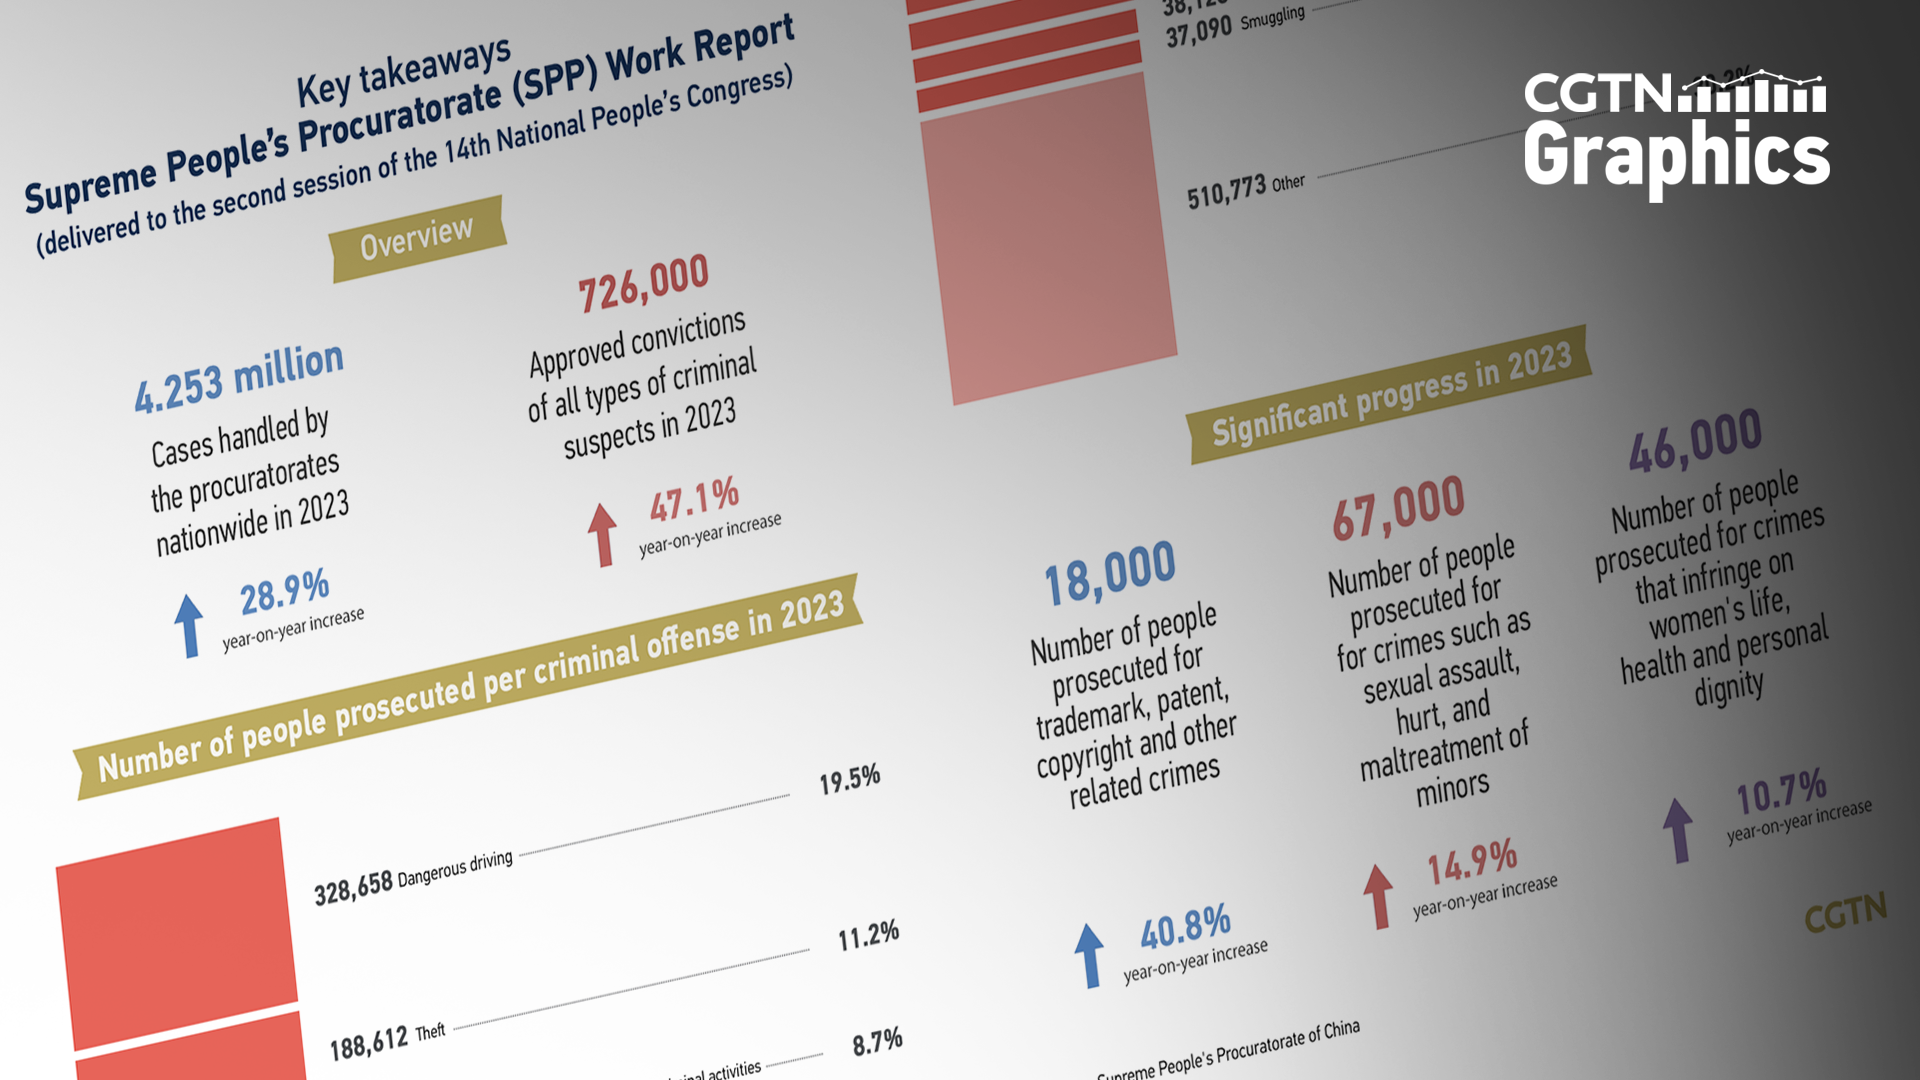 Graphics: Key takeaways from Supreme People's Procuratorate work report